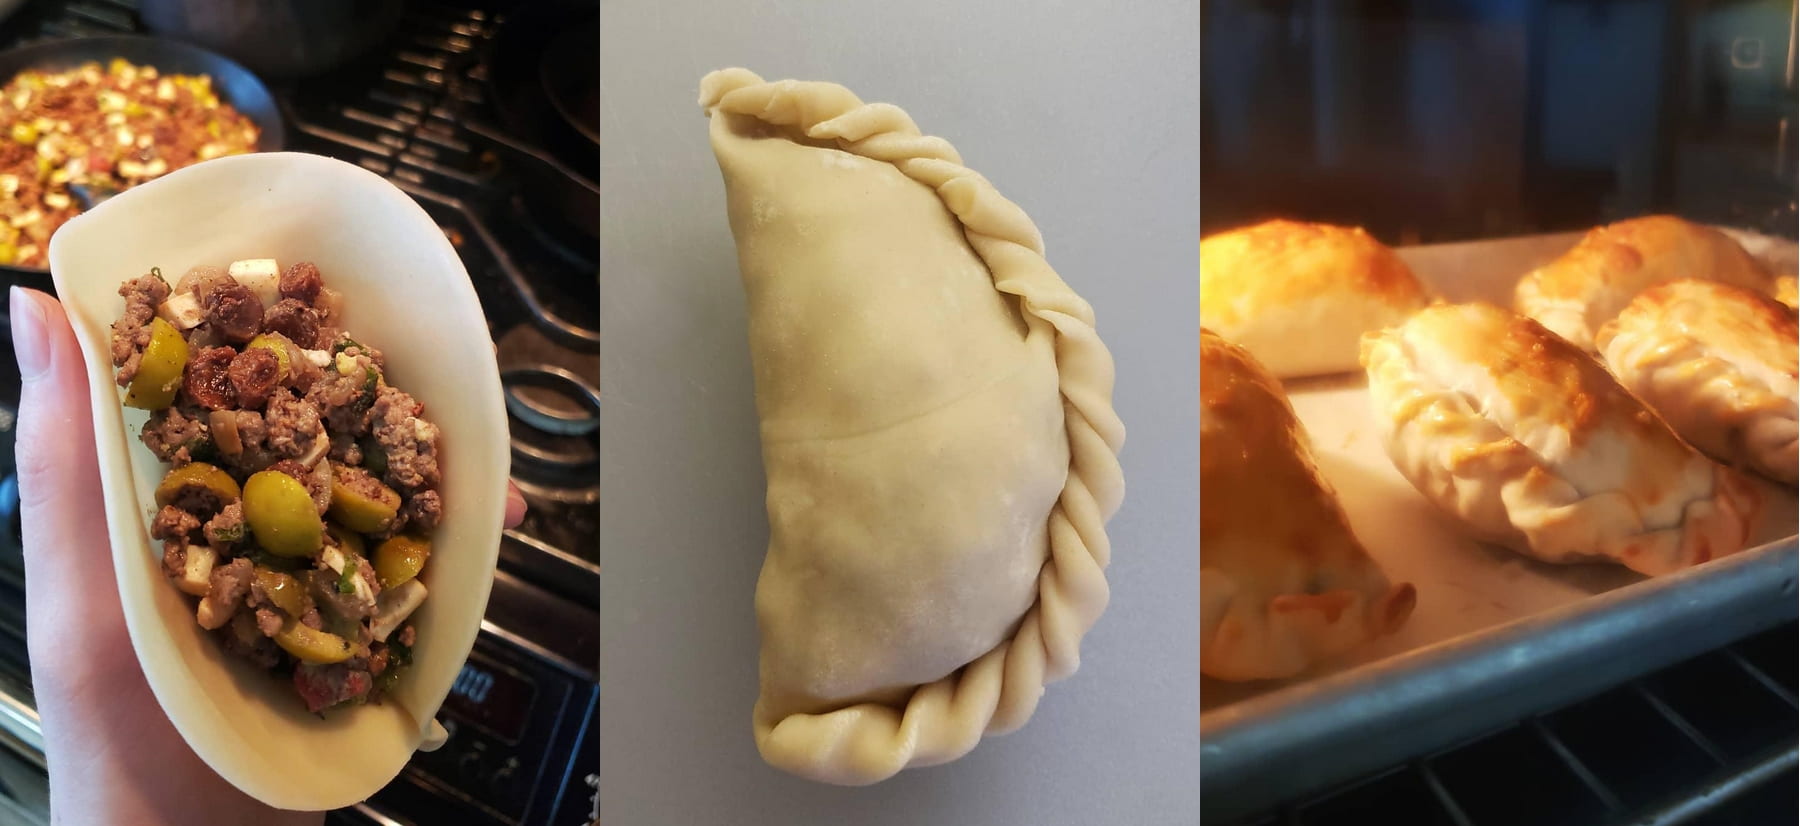 Three pictures: left is open empanada with filling; middle is closed raw empanada; right is empanadas baking in the oven